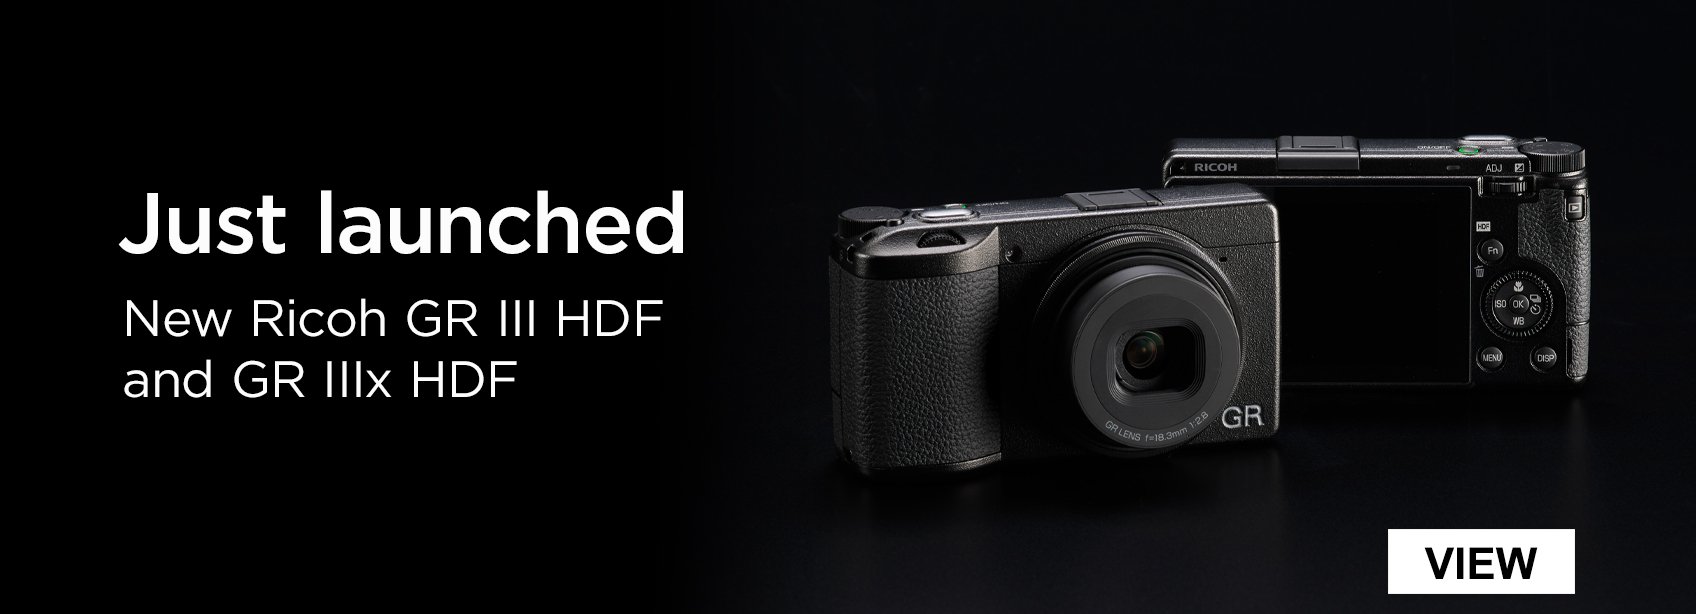 Just launched New Ricoh GR III HDF and GR IIIx HDF